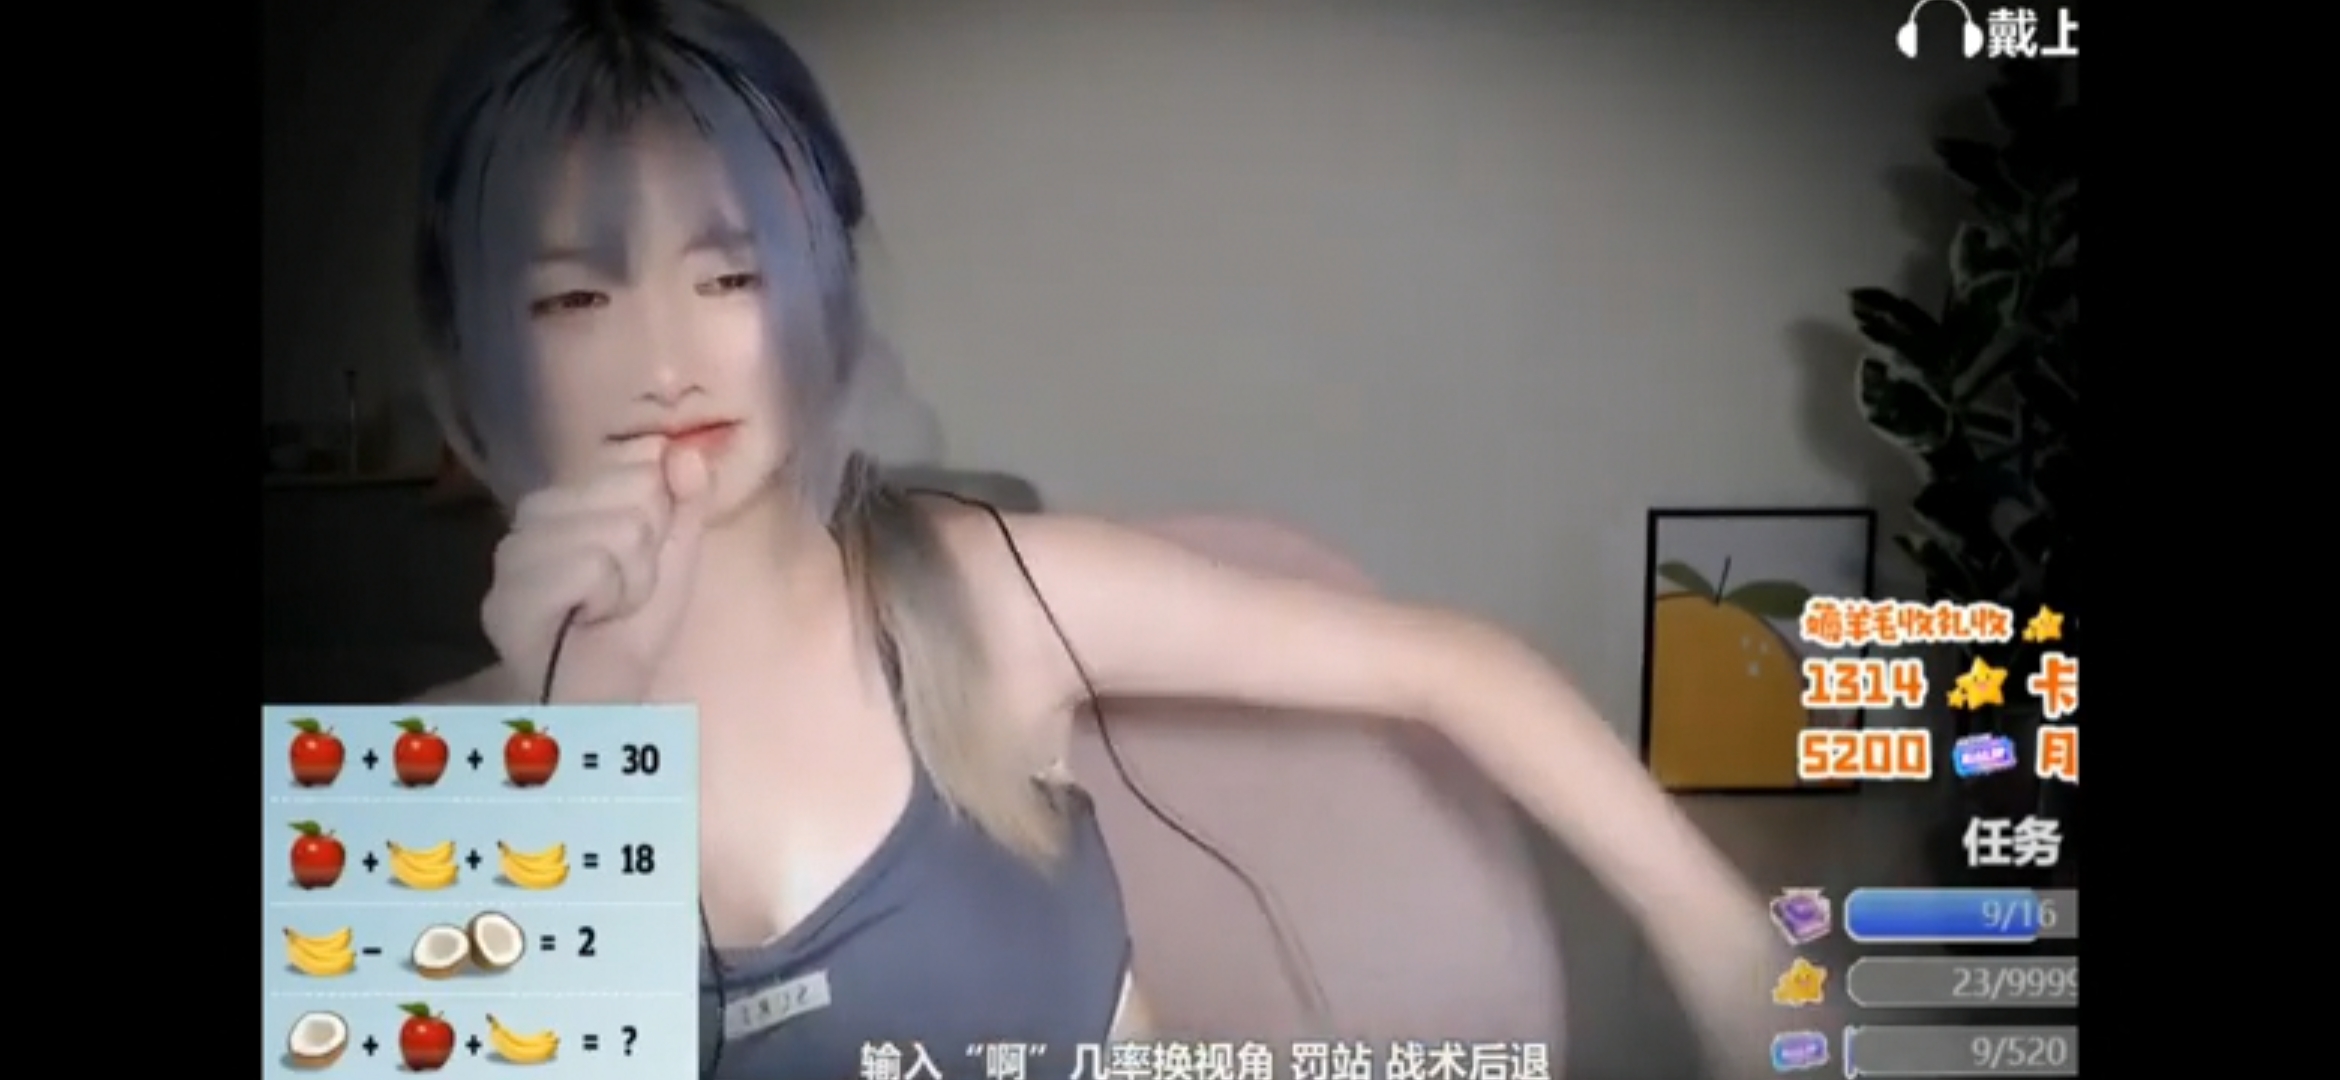 Chinese girl in stream ... farting